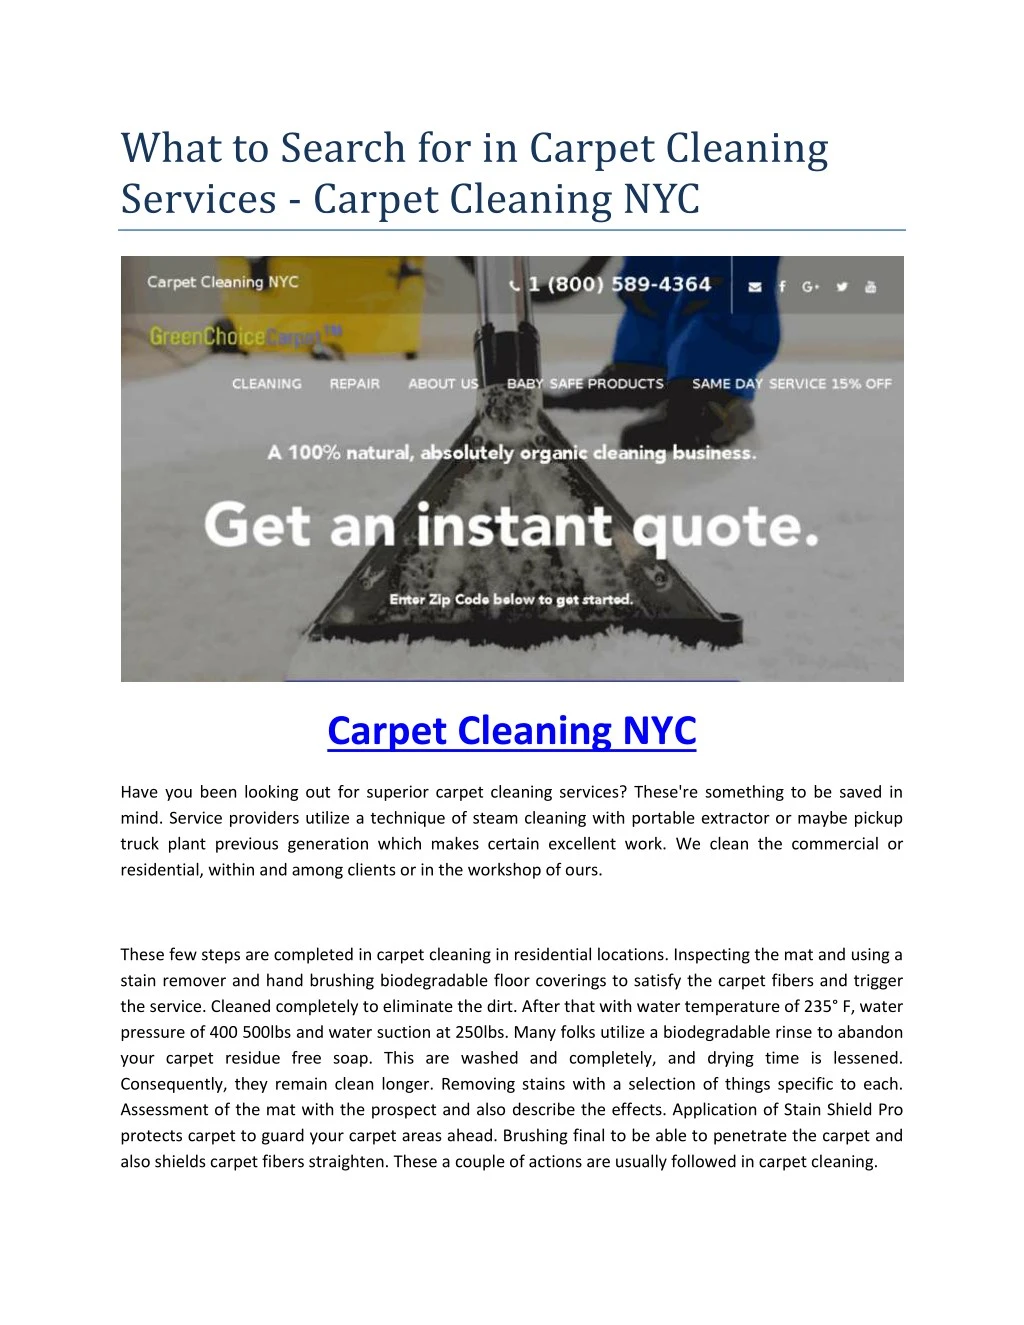 what to search for in carpet cleaning services